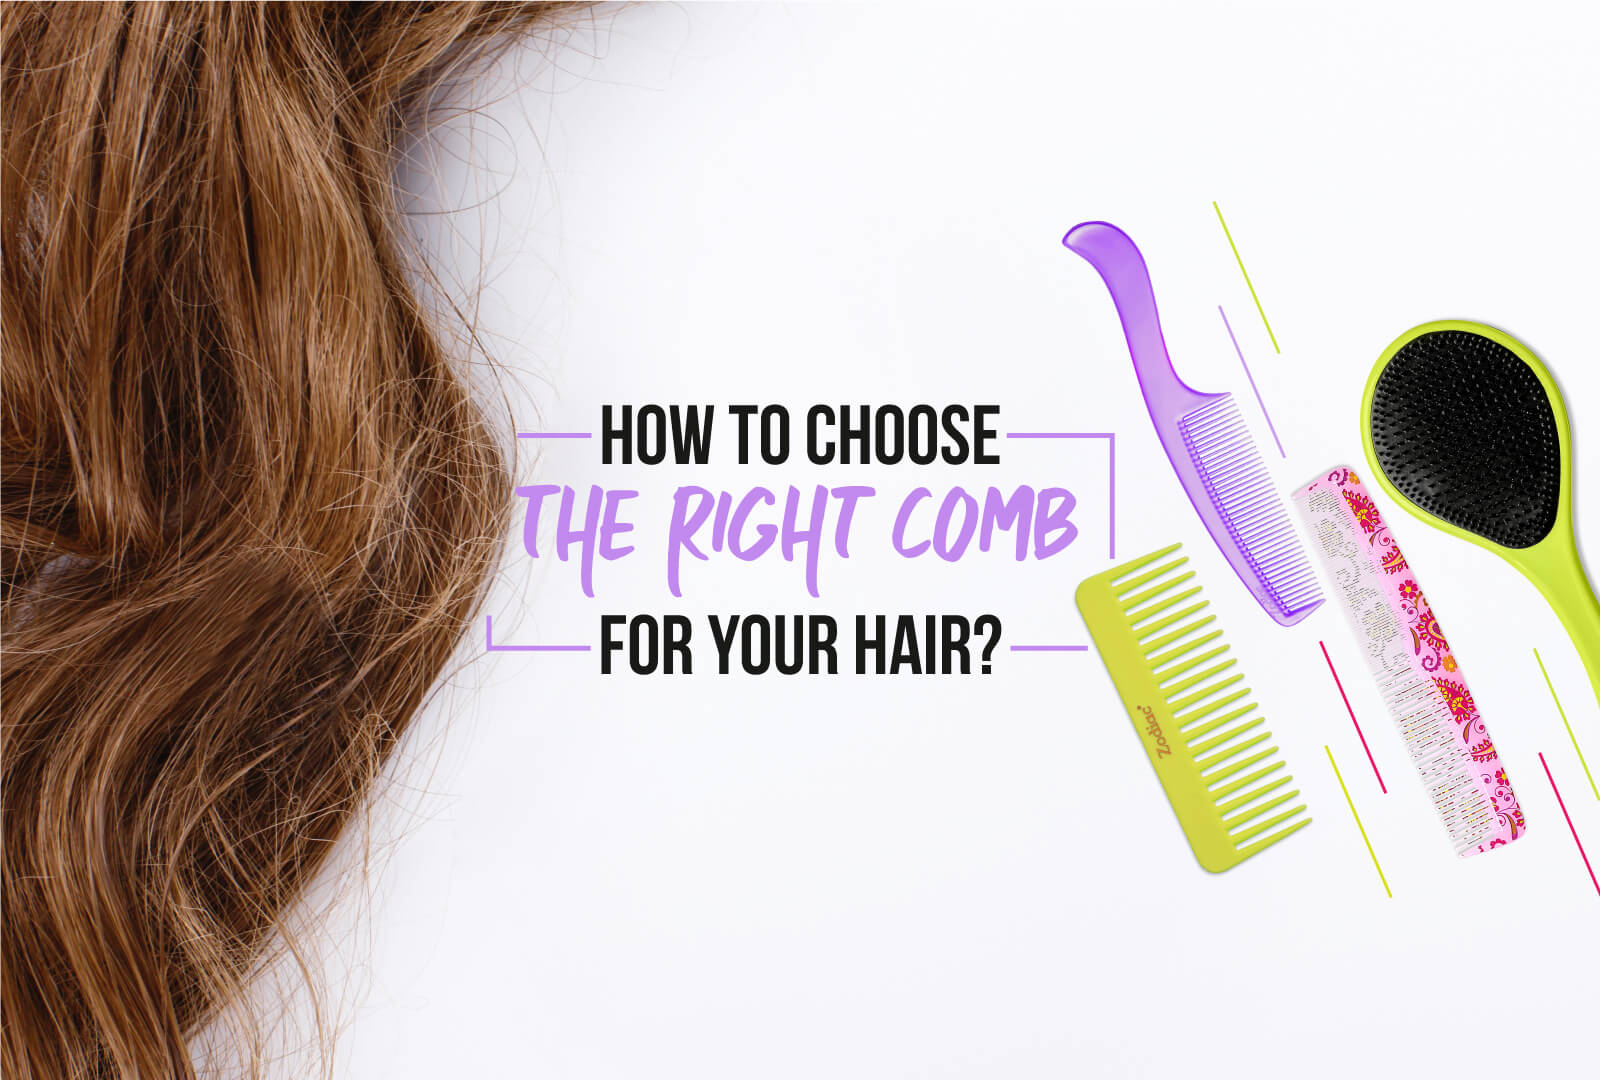 How to choose the right comb for your hair